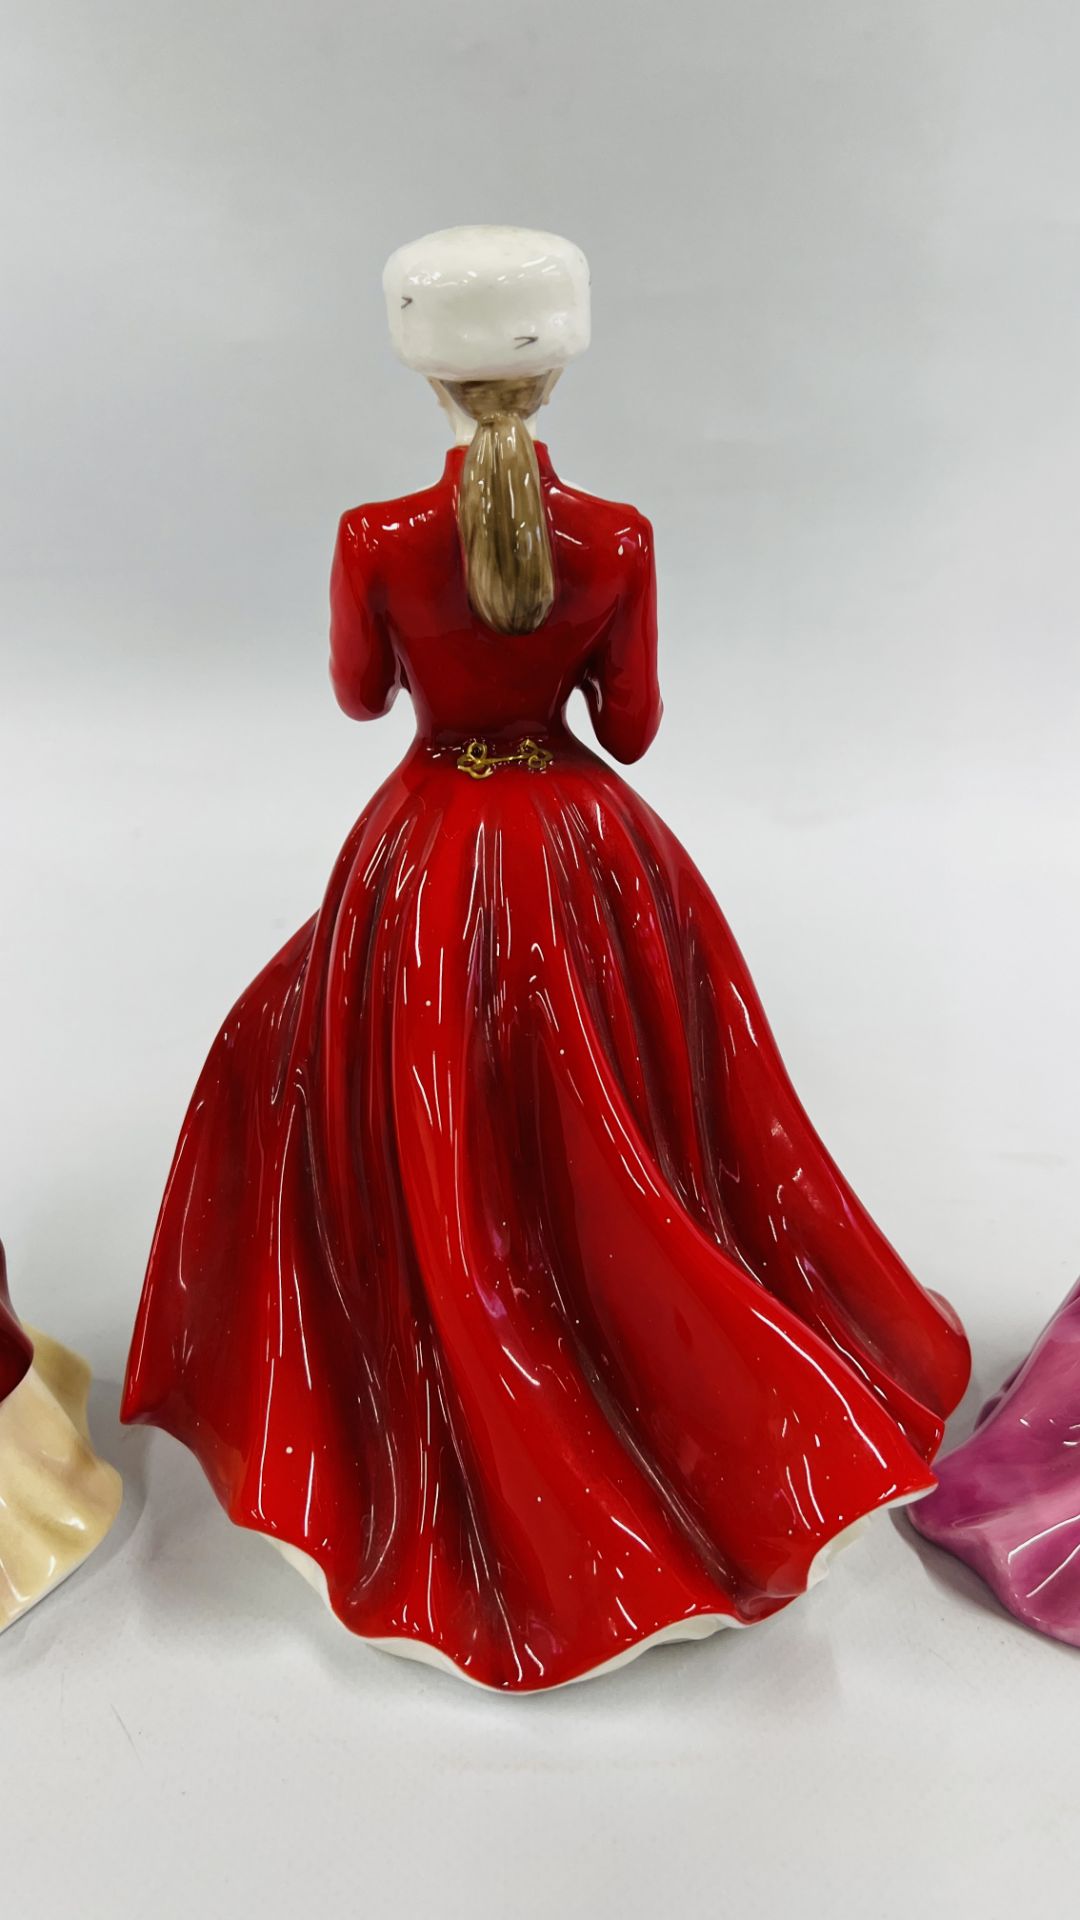 3 ROYAL DOULTON CABINET COLLECTORS FIGURINES TO INCLUDE "NATALIE" HN 5012, LIMITED EDITION 1419/15, - Image 6 of 10